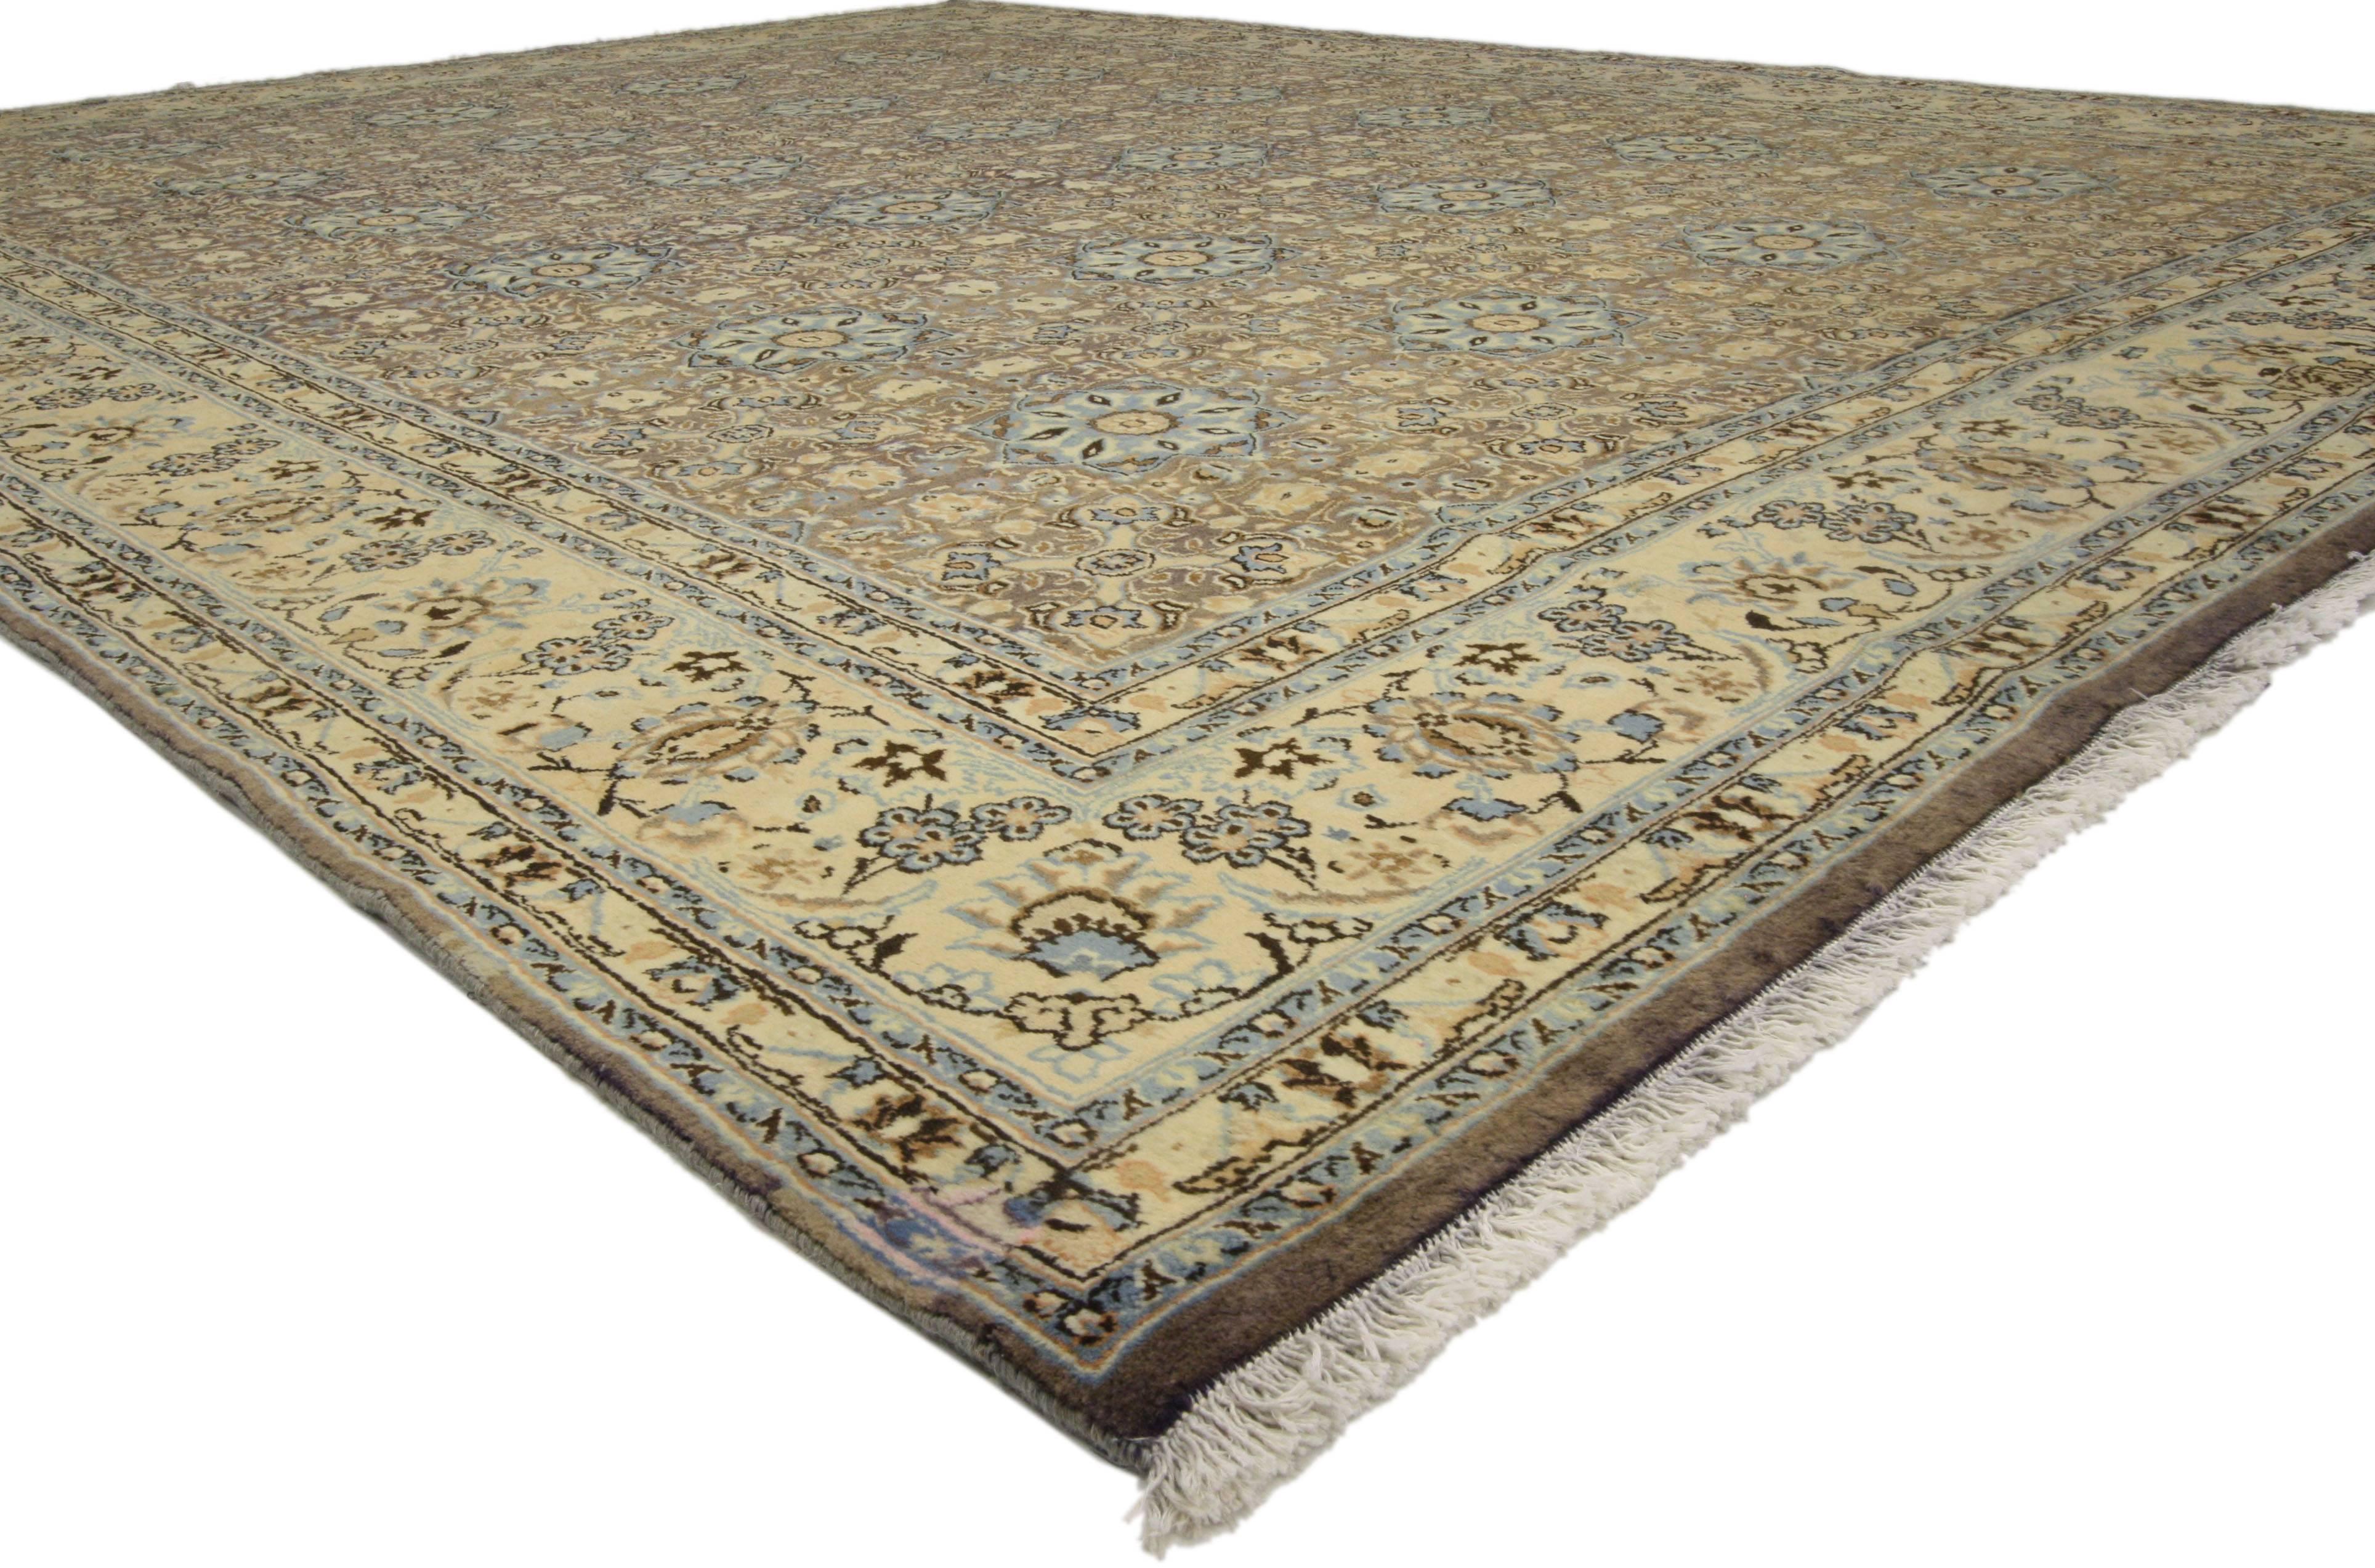 Hand-knotted wool vintage Persian Moud Mood rug features an all-over design representing the Four Seasons surrounded by a complementary border. Rendered in variegated shades of brown, lavender-gray, taupe, light blue, charcoal, tan, beige and cream.